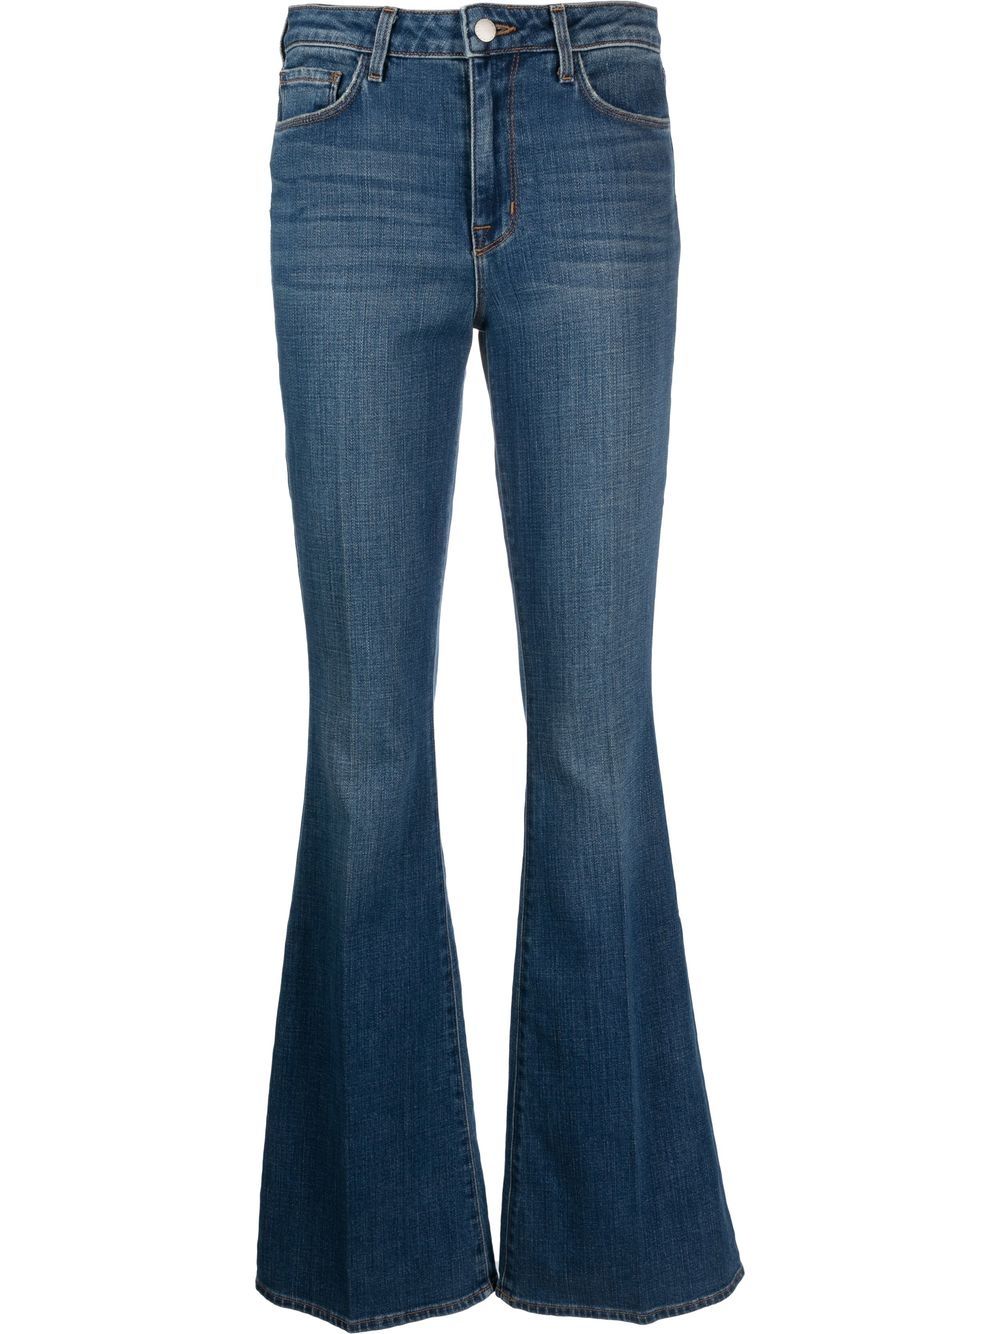 L'Agence mid-rise flared jeans - Blue von L'Agence